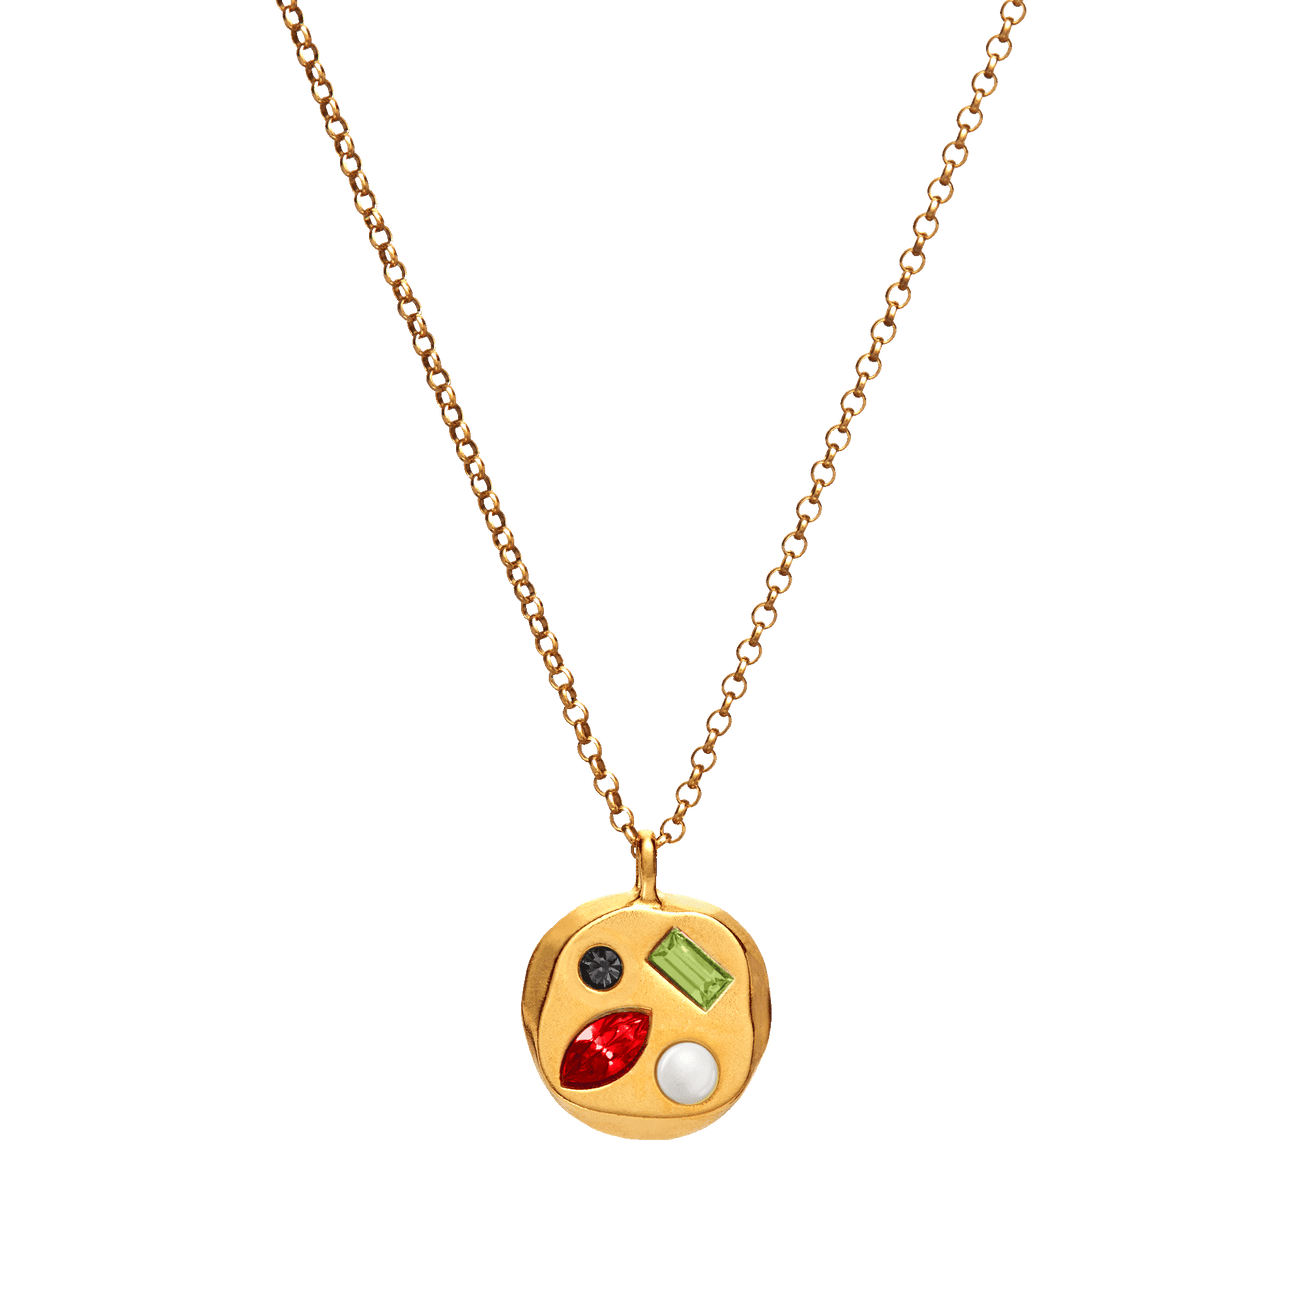 The January Fifth Pendant